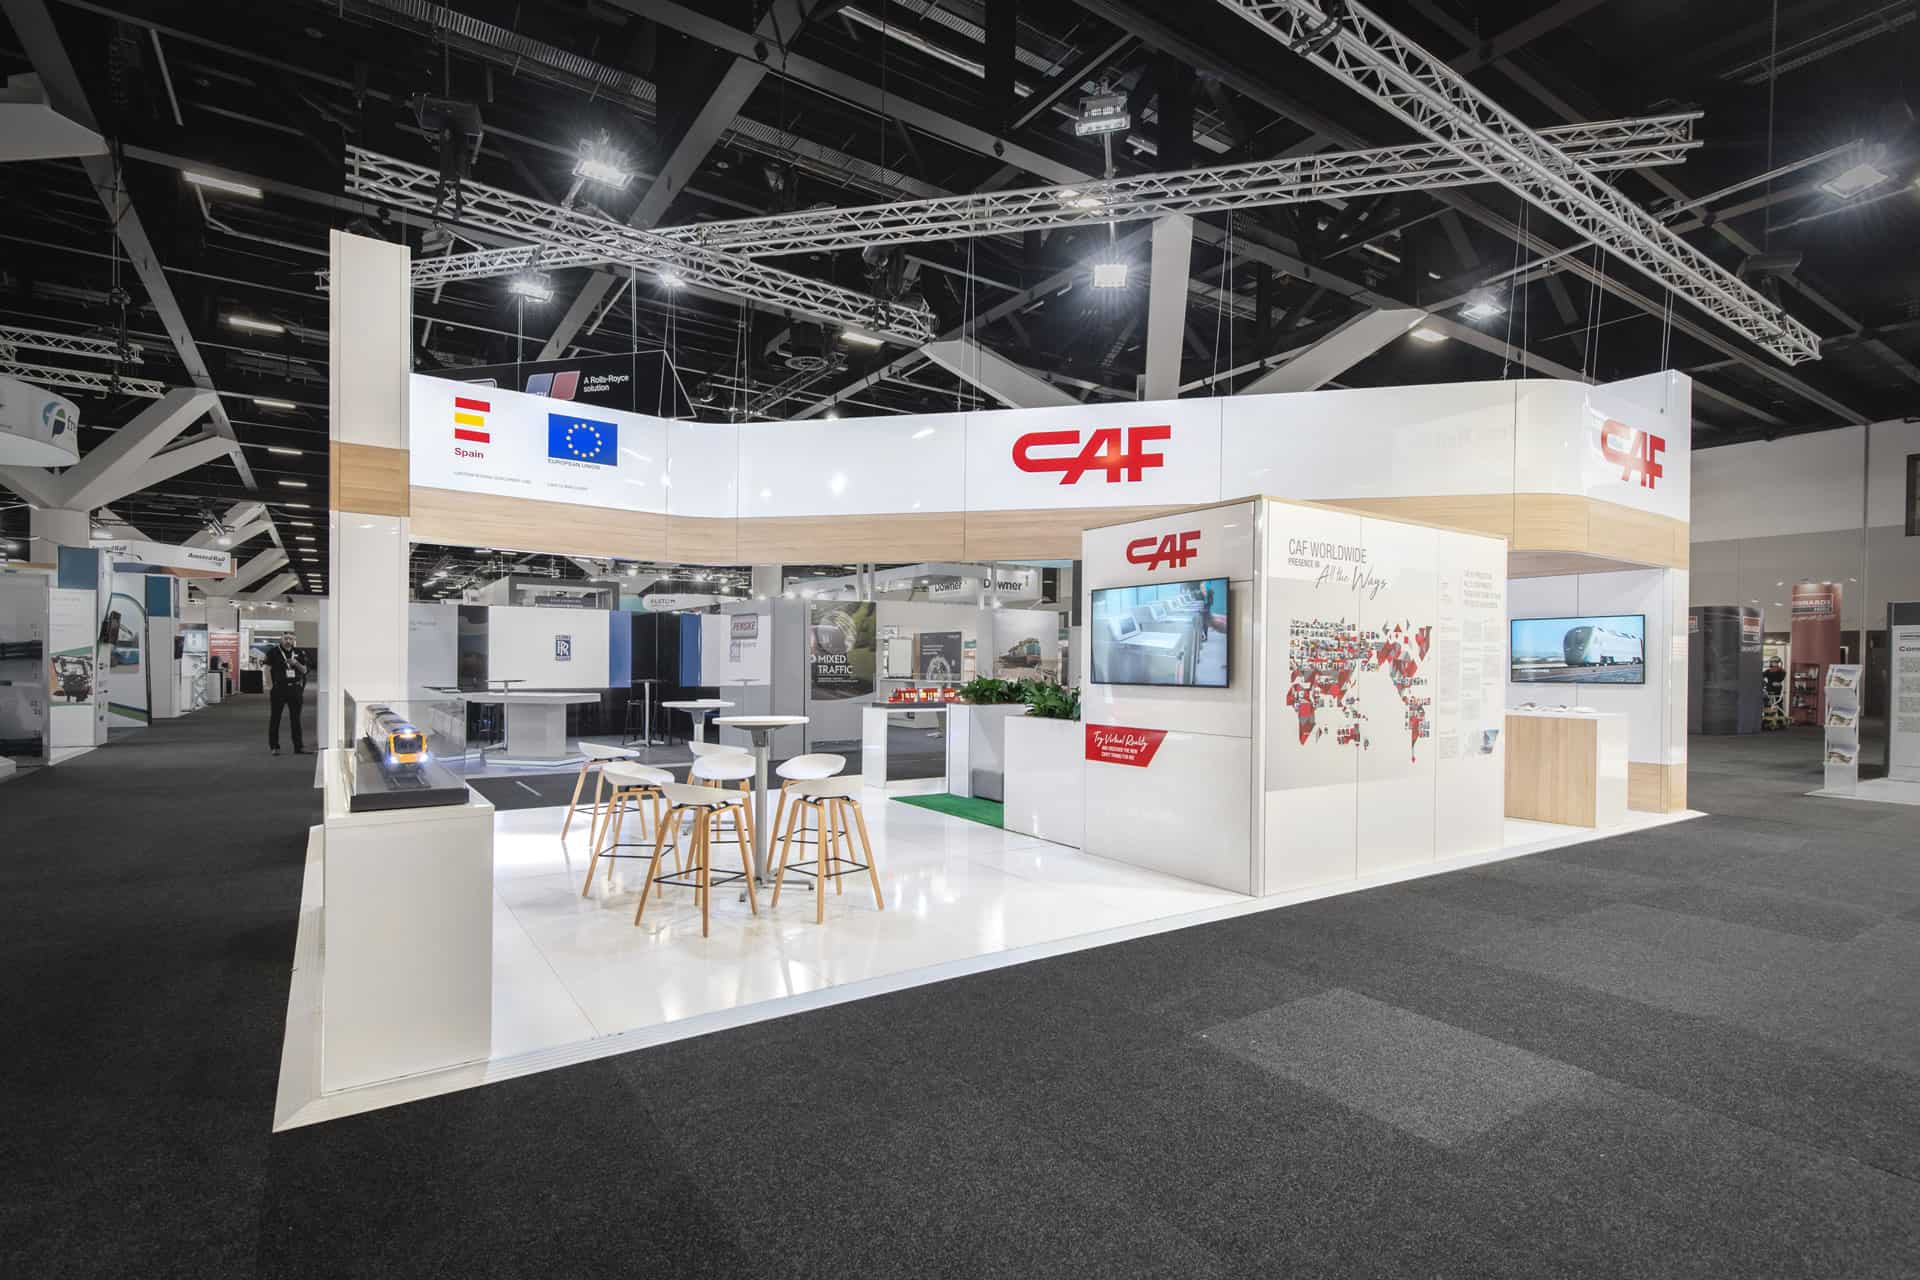 CAF custom showtopper exhibition stand at AusRail by Expocentric.com.au